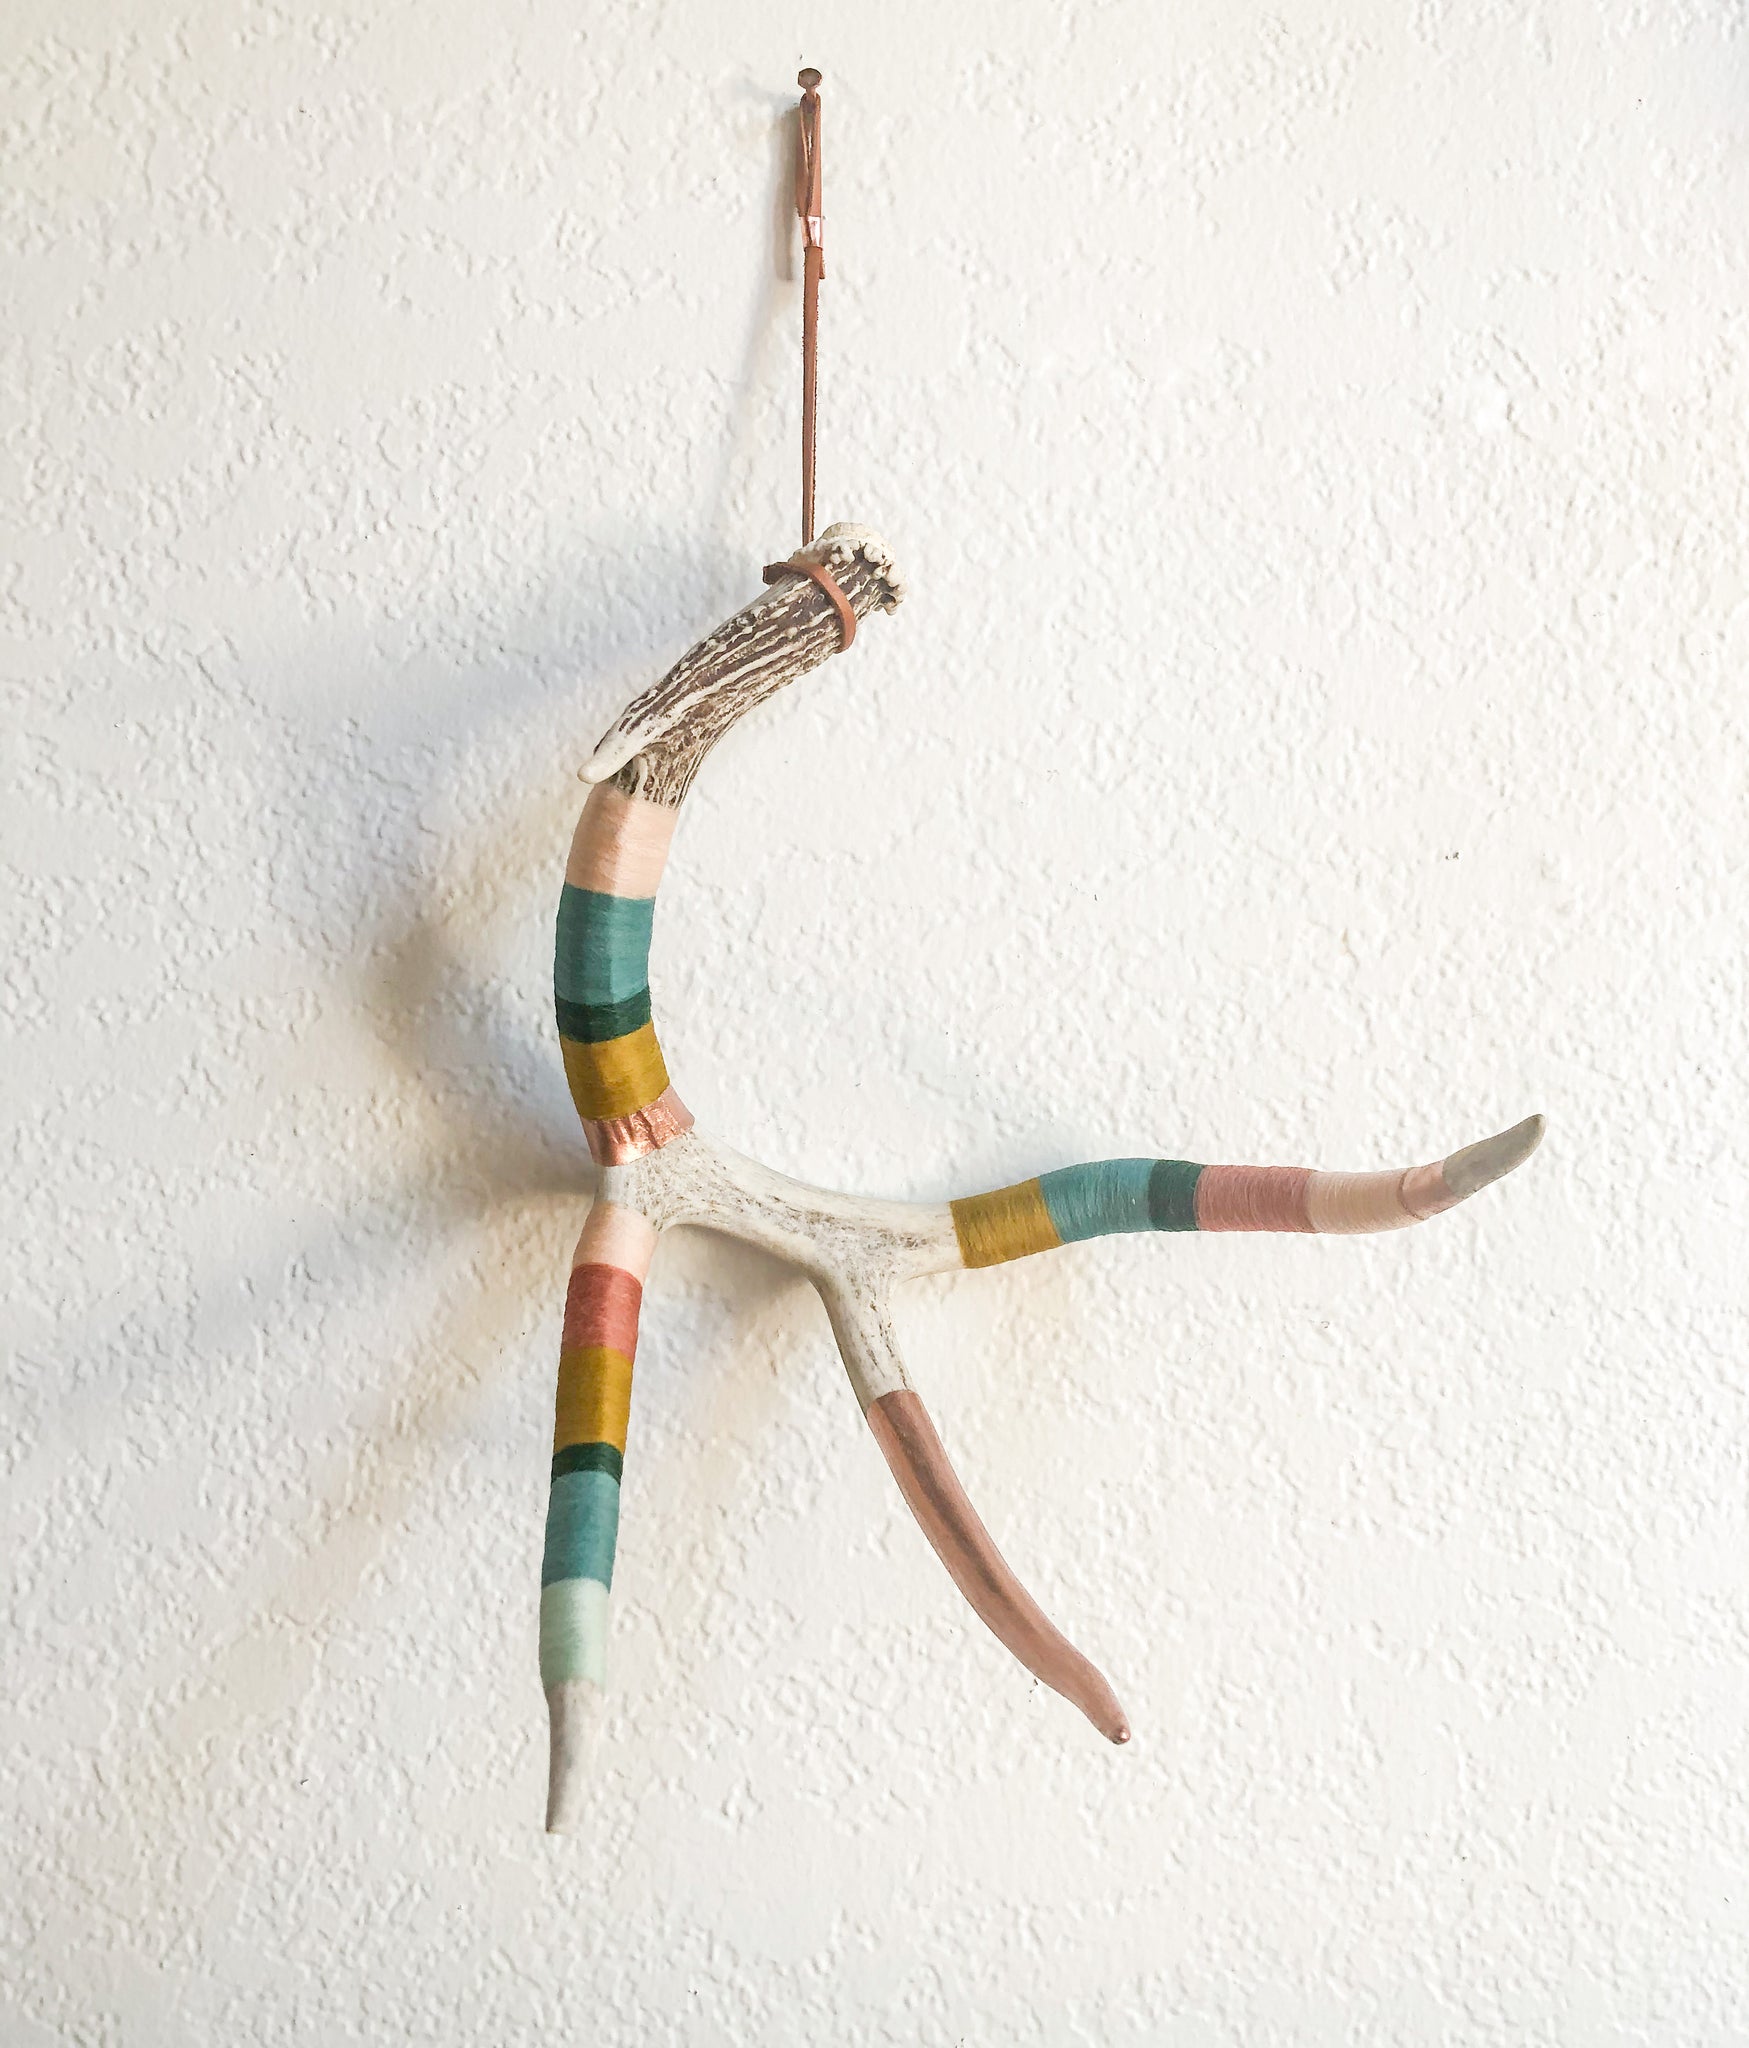 Made to Order Wool Wrapped Deer Antler with Copper - Muted Rainbow Large Whitetail